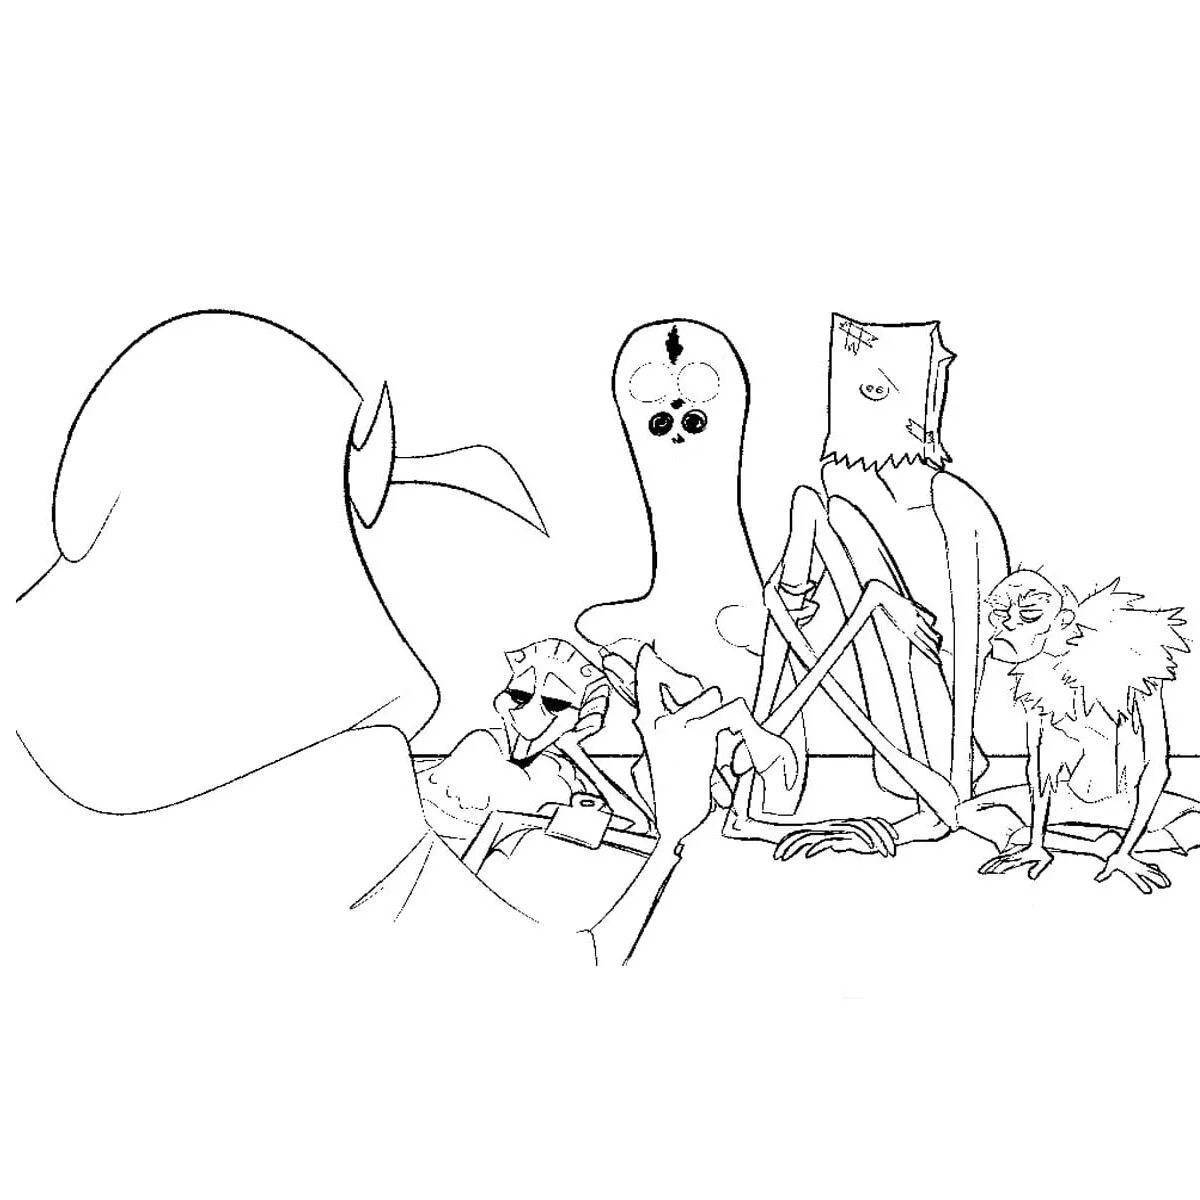 Cute shy monster coloring page